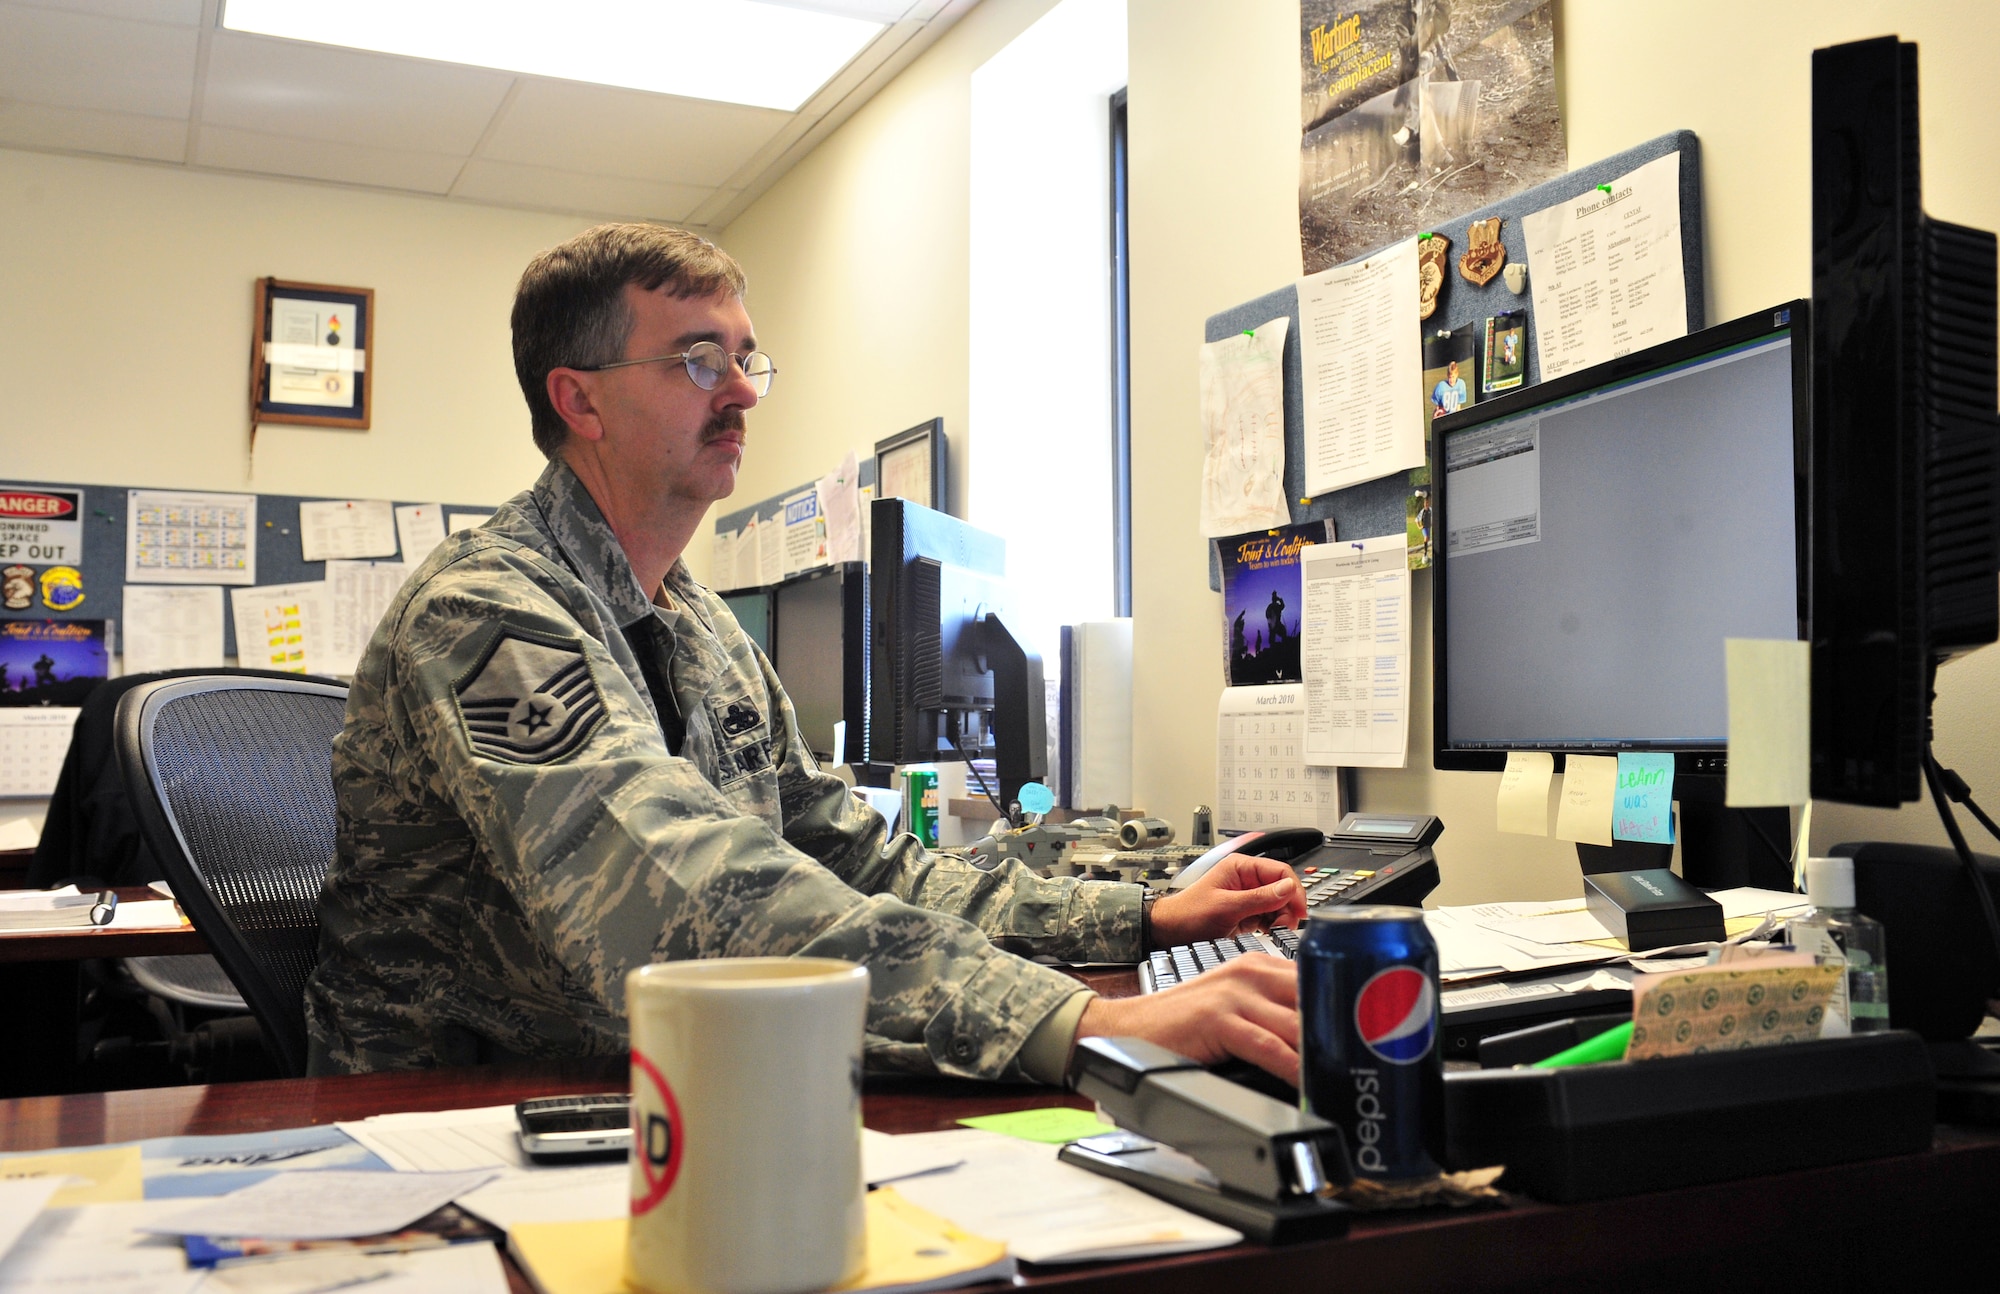 SHAW AIR FORCE BASE, S.C. - Master Sgt. Leslie Haga Jr., 9th Air Force explosive safety superintendent, works diligently at his computer March 31. Master Sgt. Haga was recently selected as the annual award winner for the Air Force Explosive Safety Outstanding Individual Achievement Award. Master Sgt. Haga was recognized for his collaboration with the 51st Fighter Wing during his last deployment. (U.S. Air Force photo/Airman 1st Class Amber E. N. Jacobs)